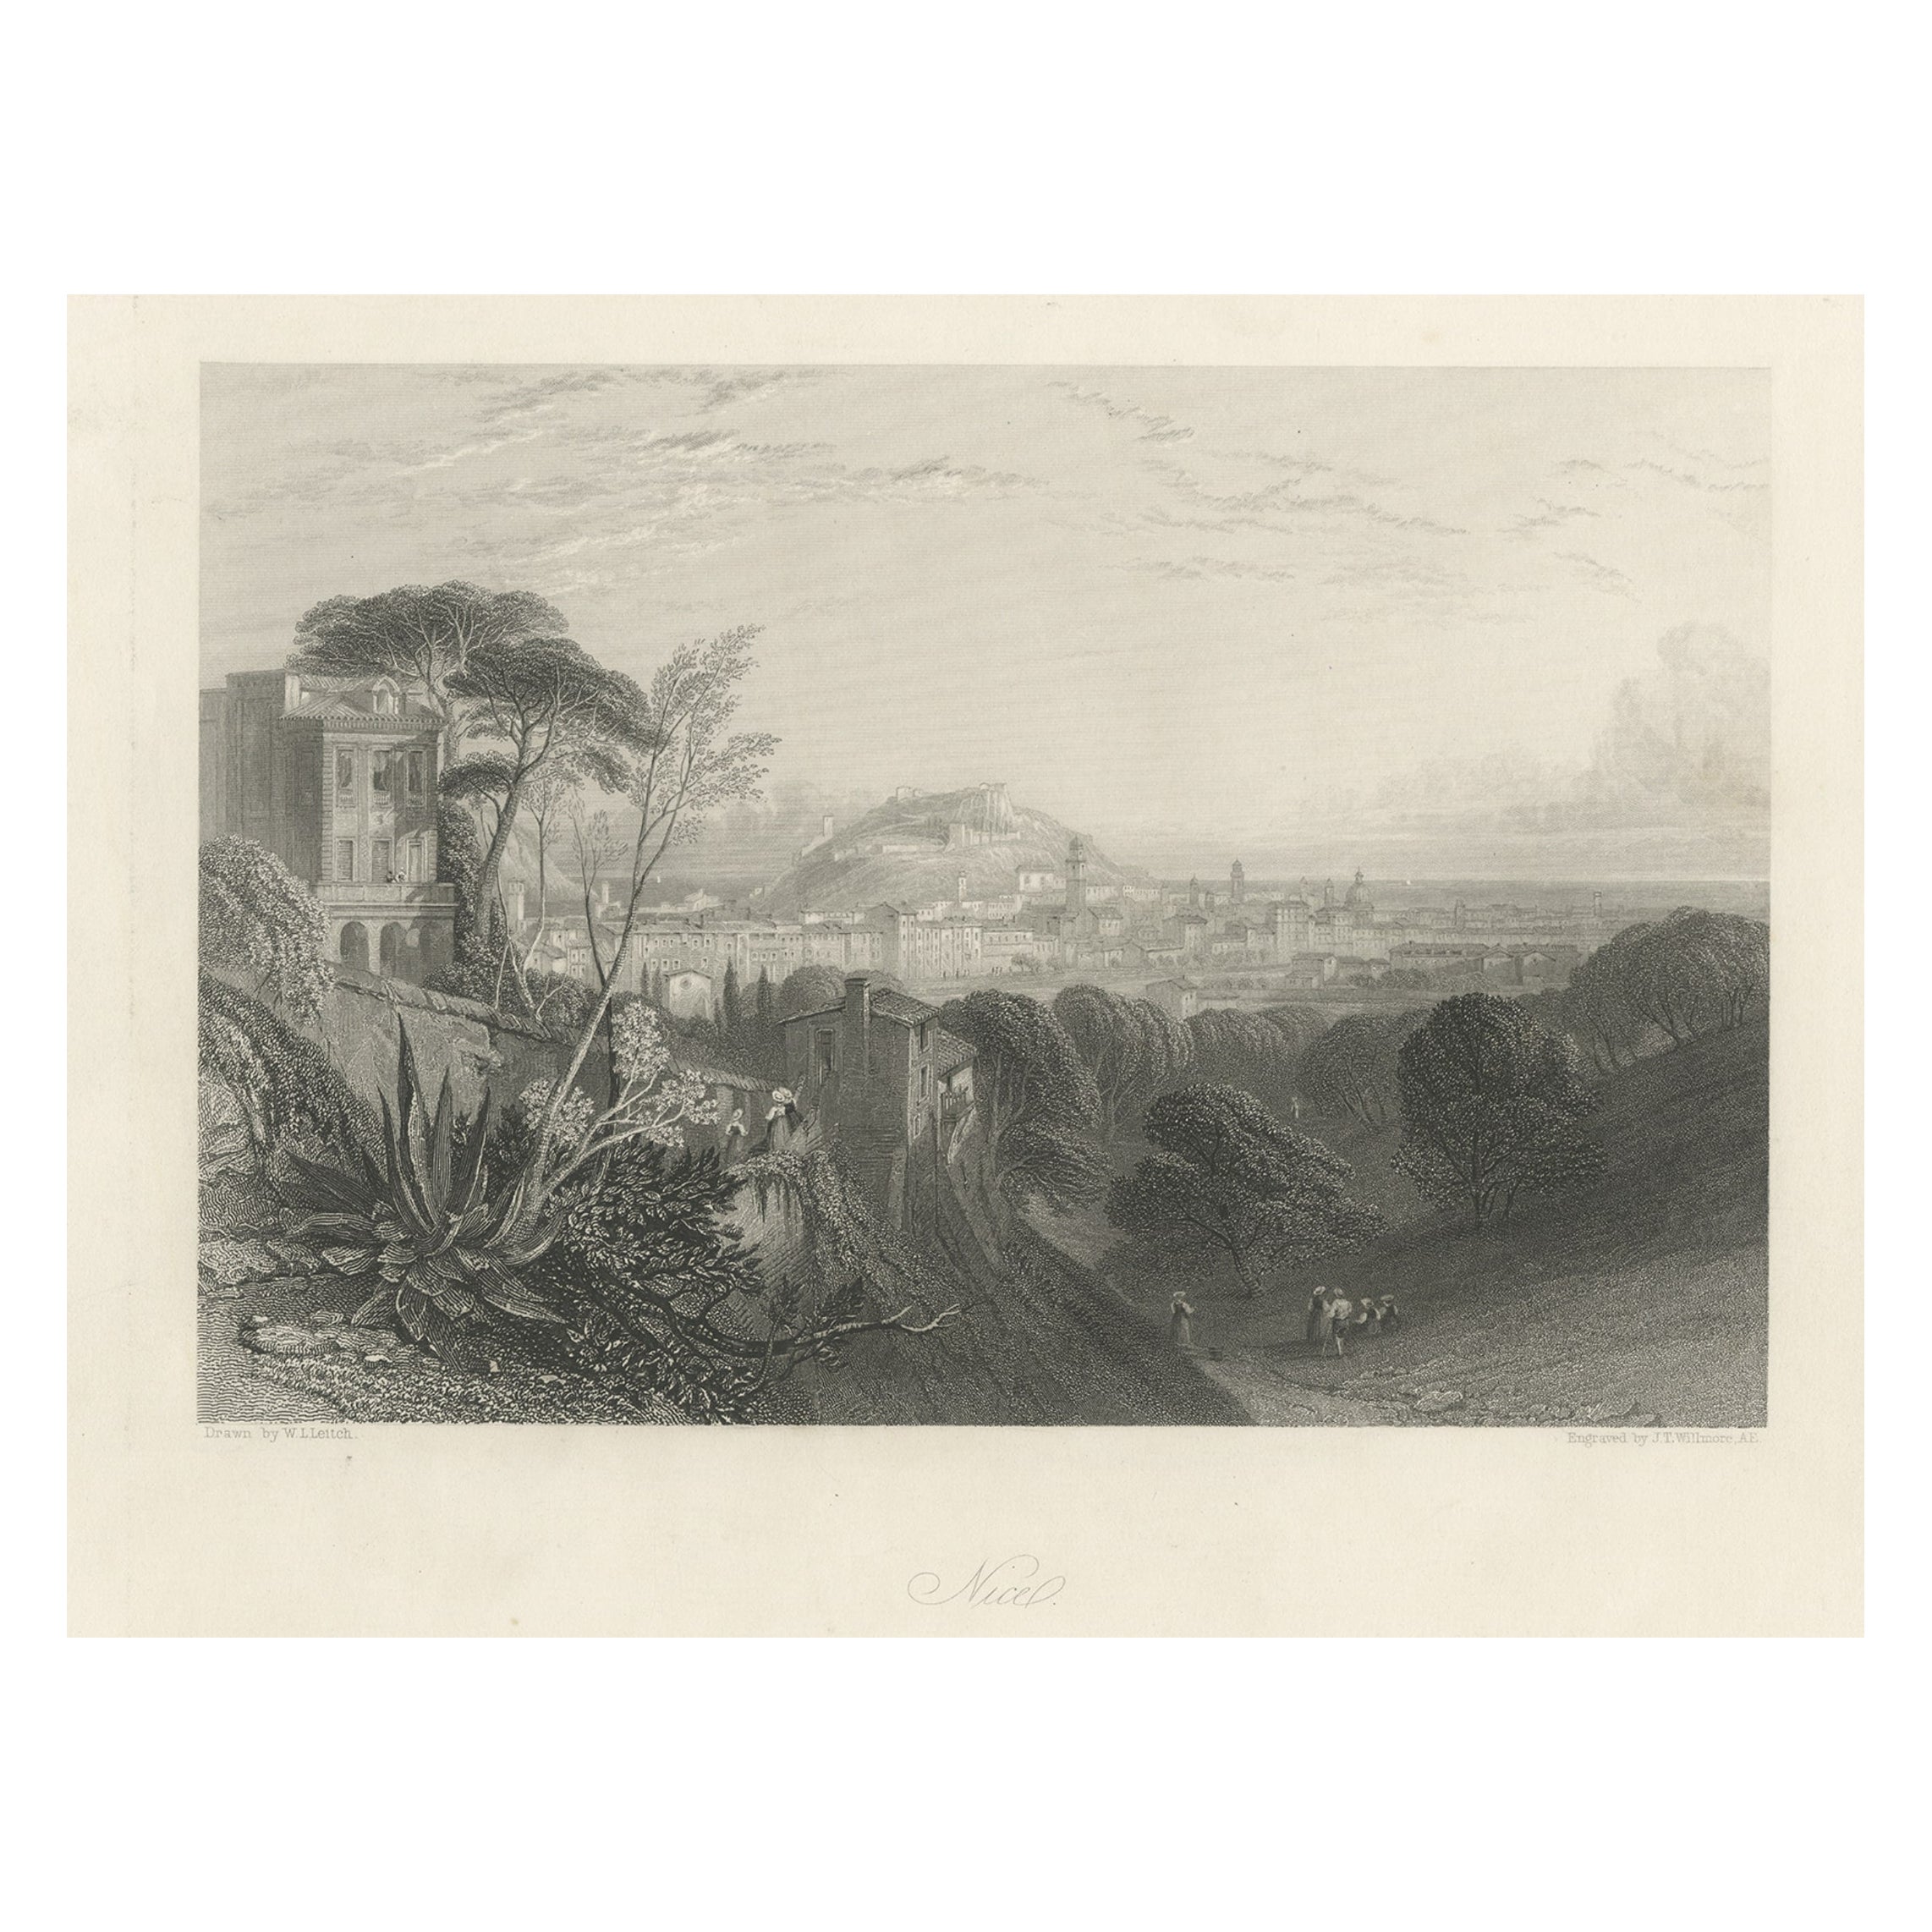 Antique Print of the City of Nice in Southern France, 1856